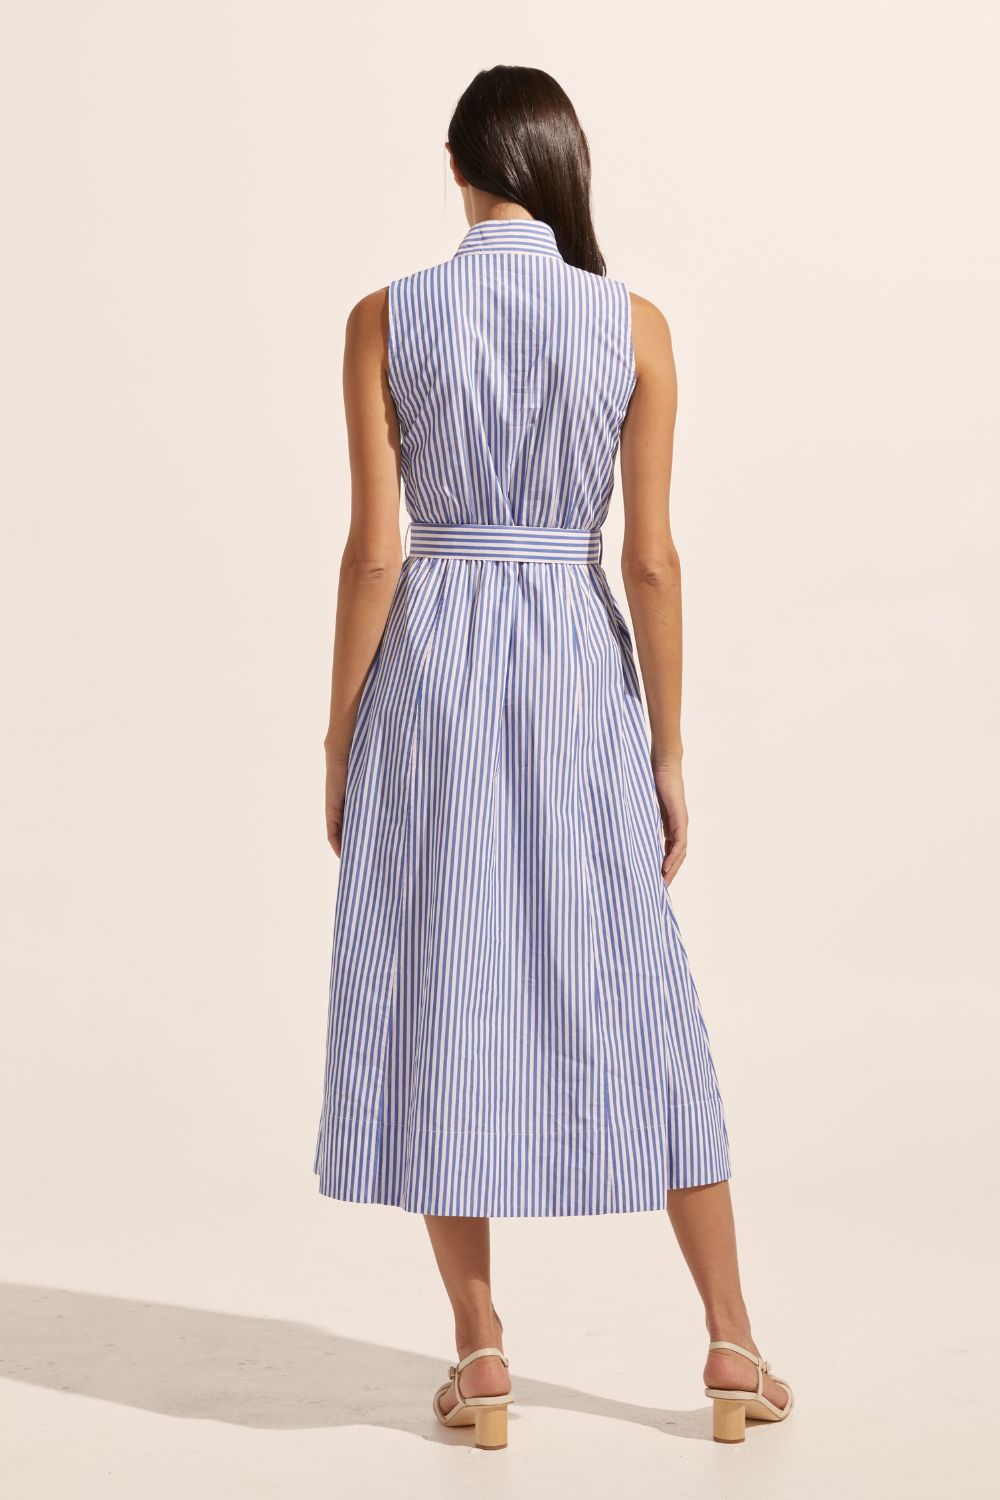 blue and white stripe, high neckline, side pockets, oversized patch pockets, covered placket, d-ring fabric belt, sleeveless, midi dress, back image